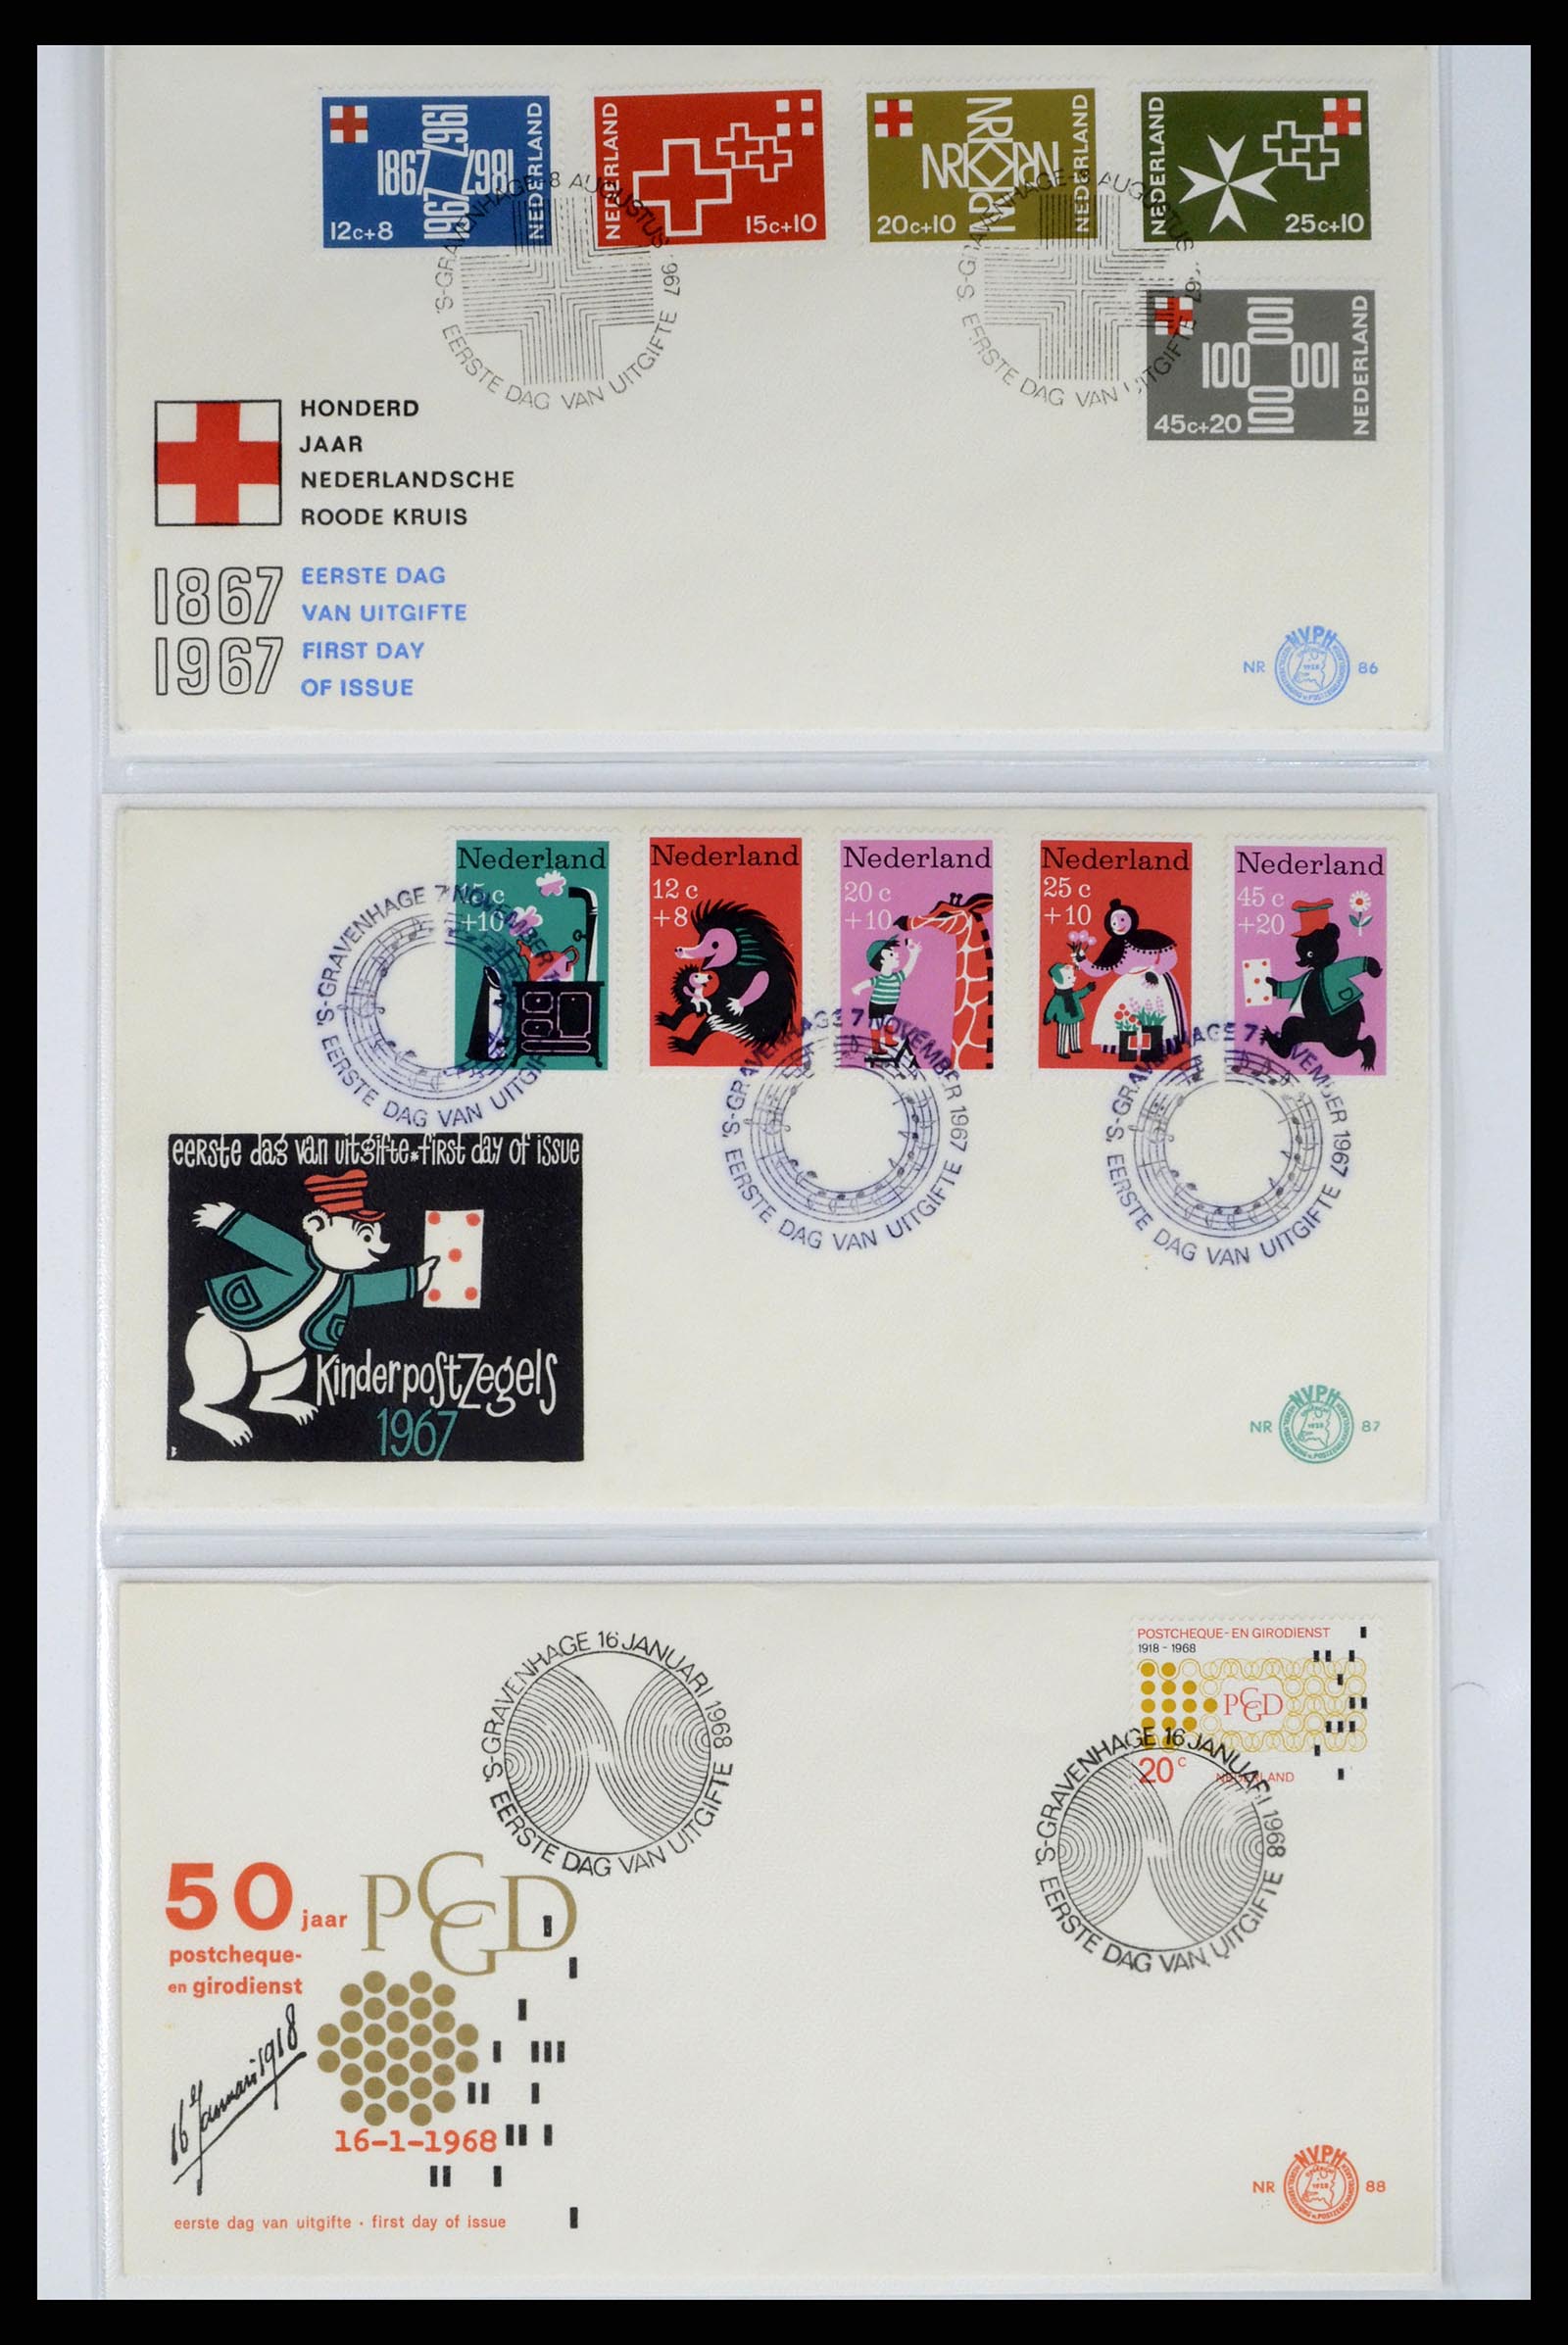 37983 023 - Stamp Collection 37983 Netherland FDC's 1954-1987.